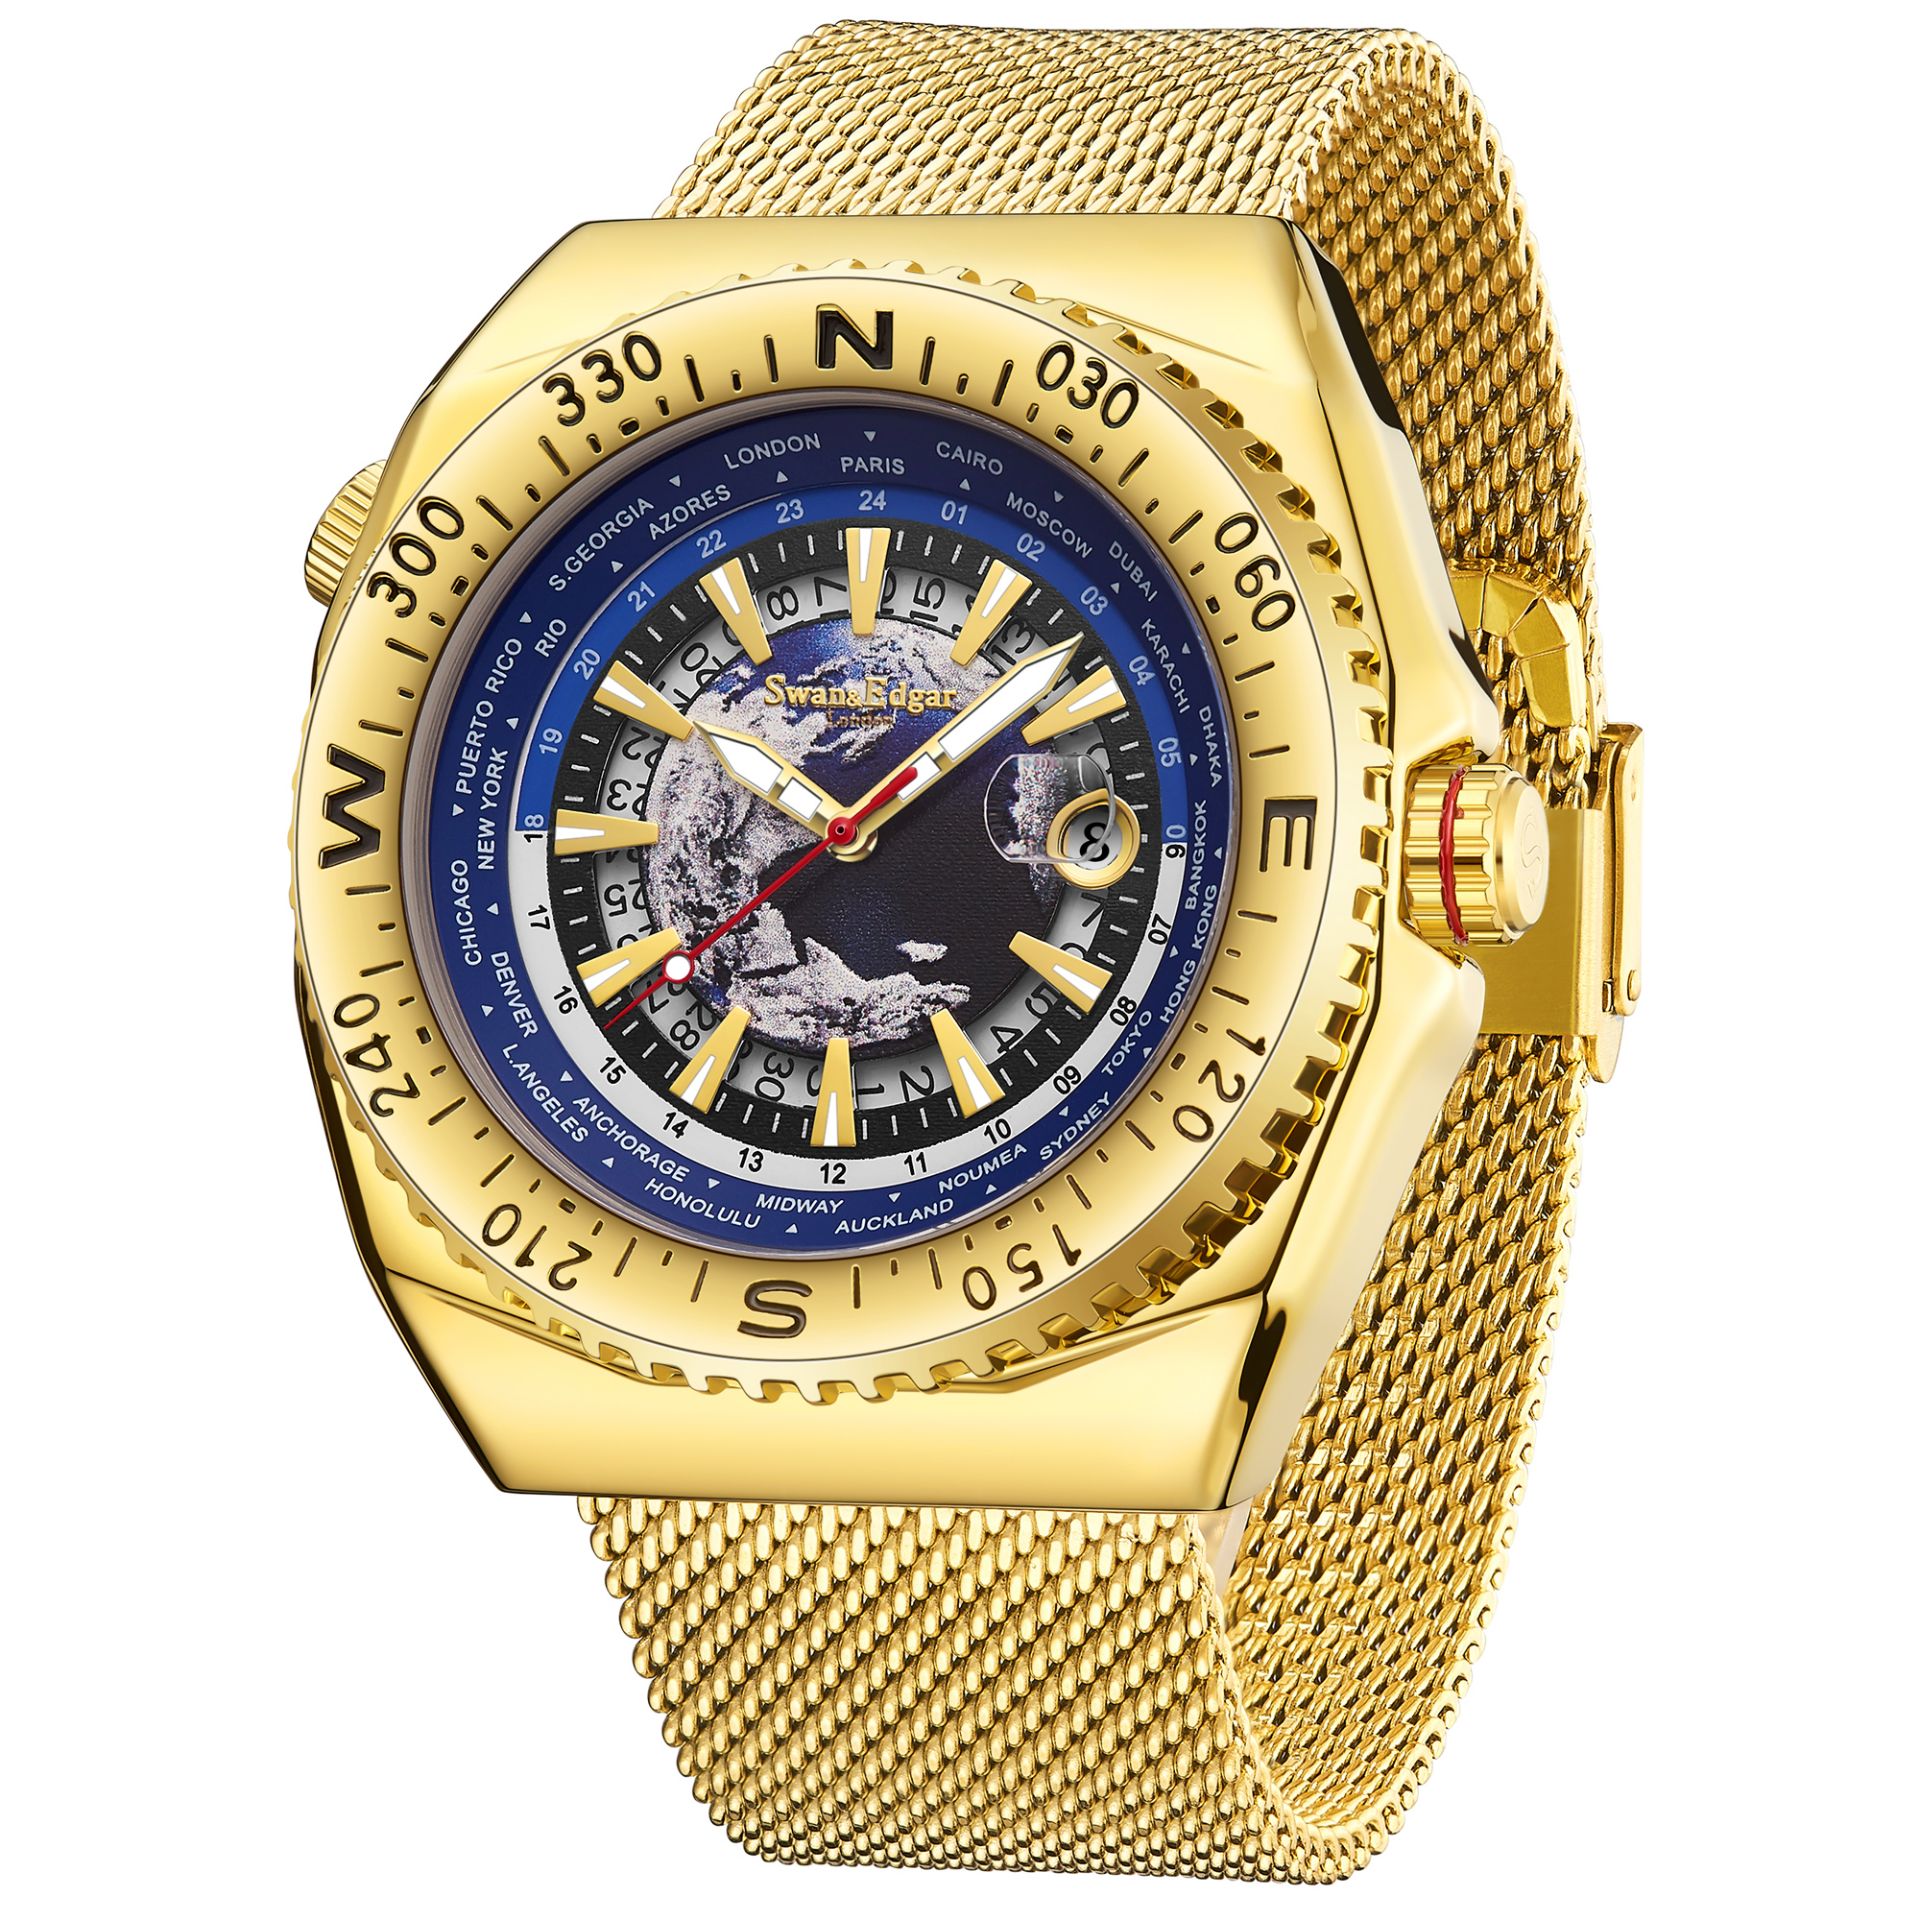 Swan & Edgar Hand Assembled World Compass Automatic Gold Watch - Free Delivery & 5 Year Warranty - Image 3 of 4